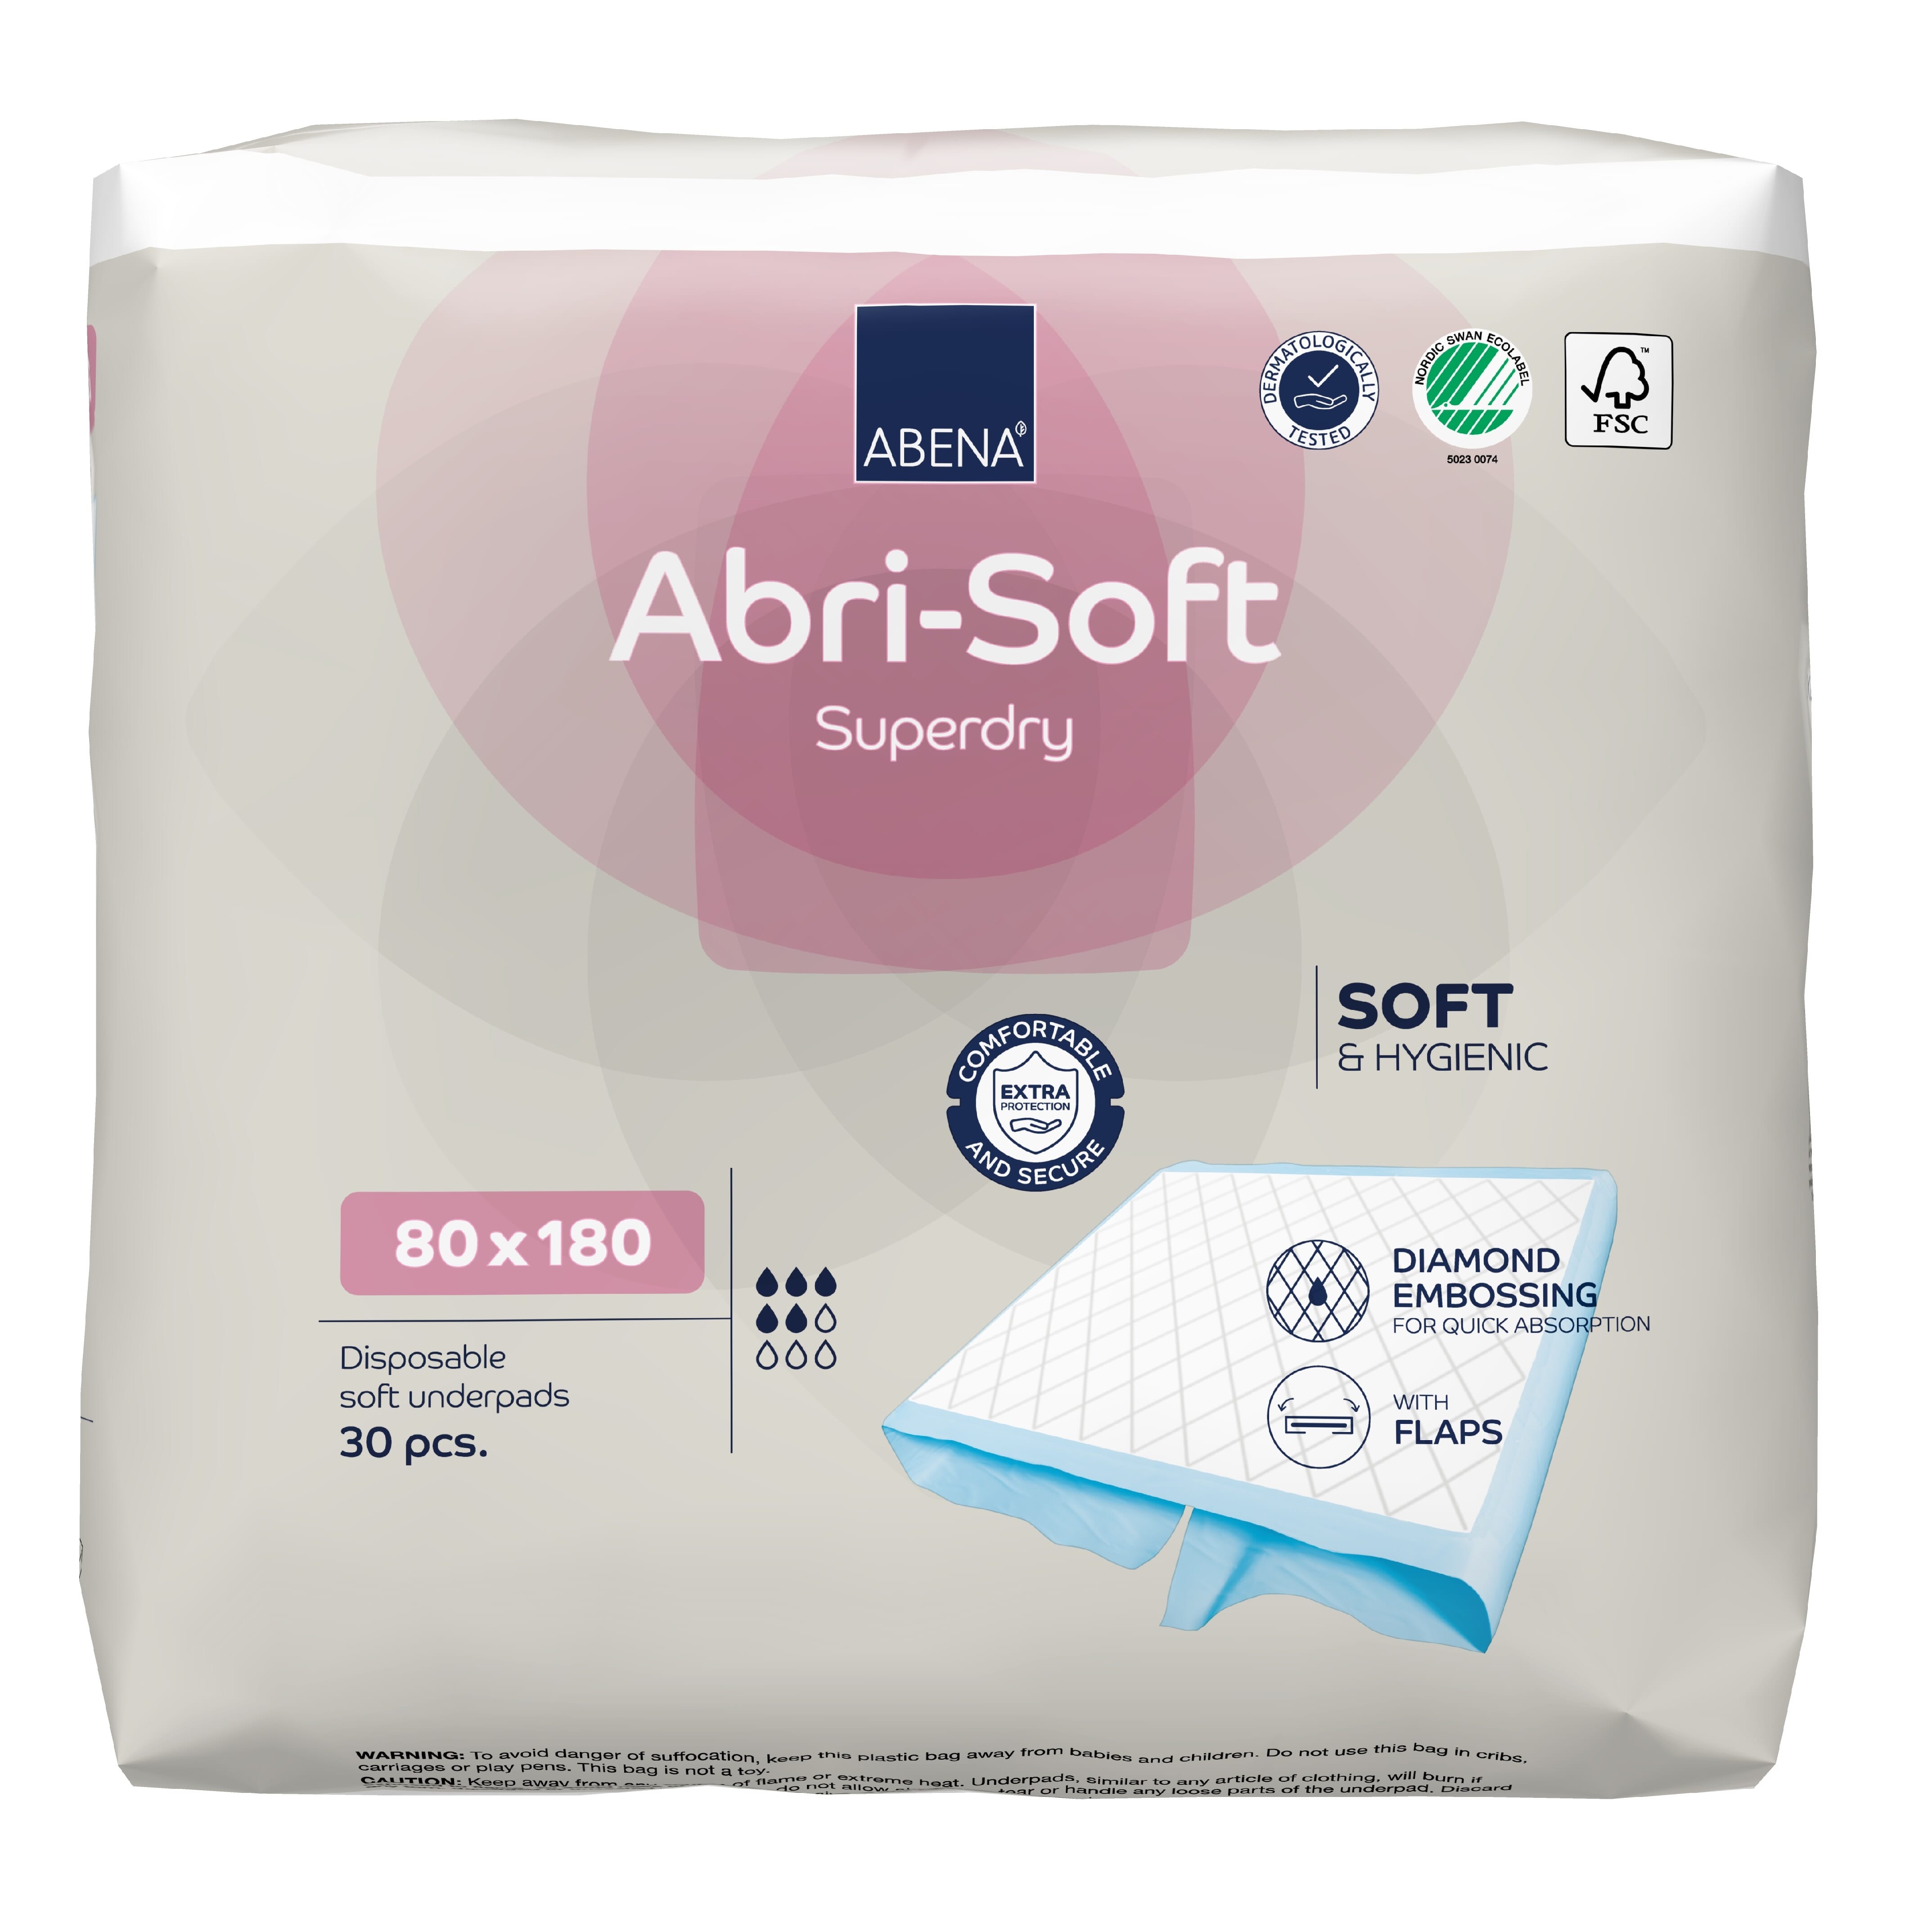 Image of Abena Abri-Soft Superdry Disposable Bed Pads with Flaps